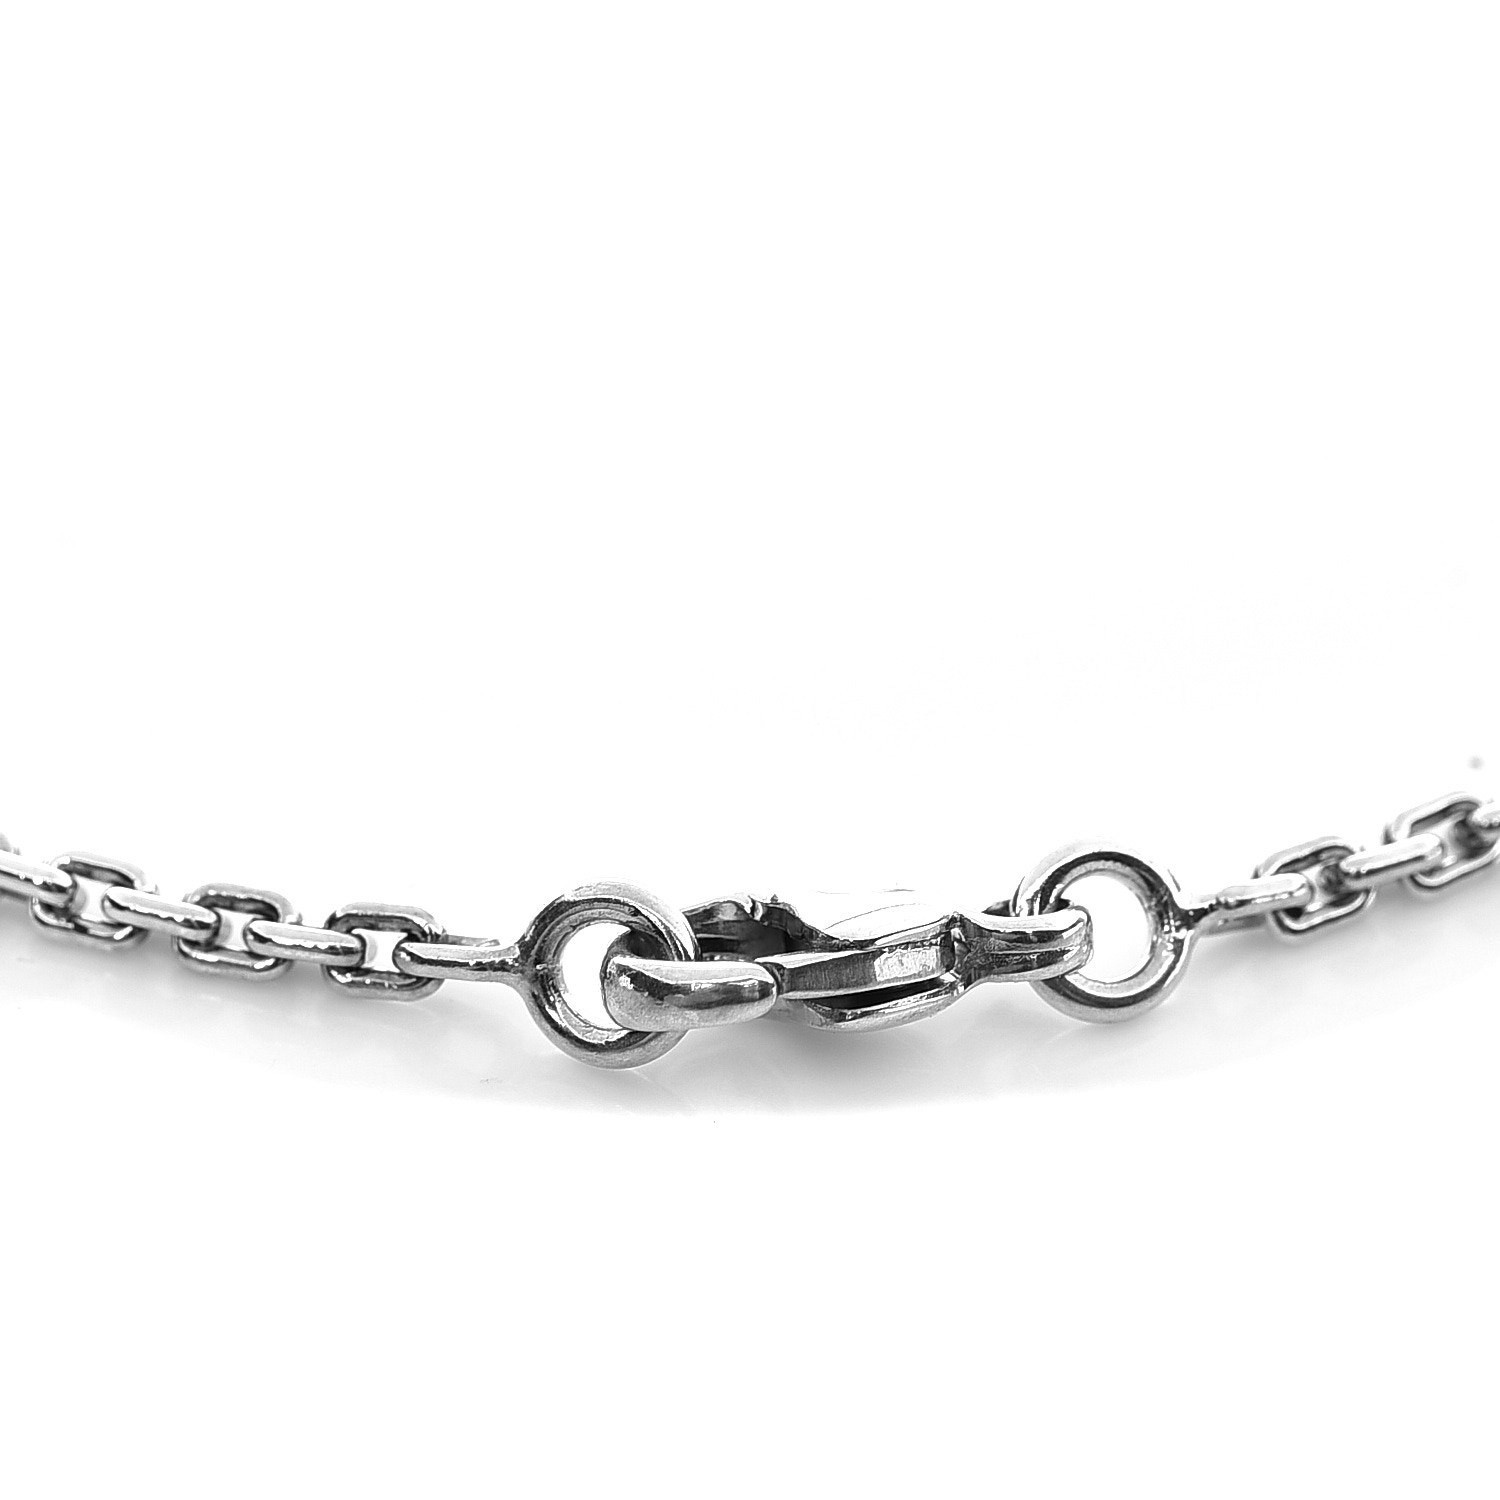 Products by Louis Vuitton: Silver Lockit bracelet, sterling silver